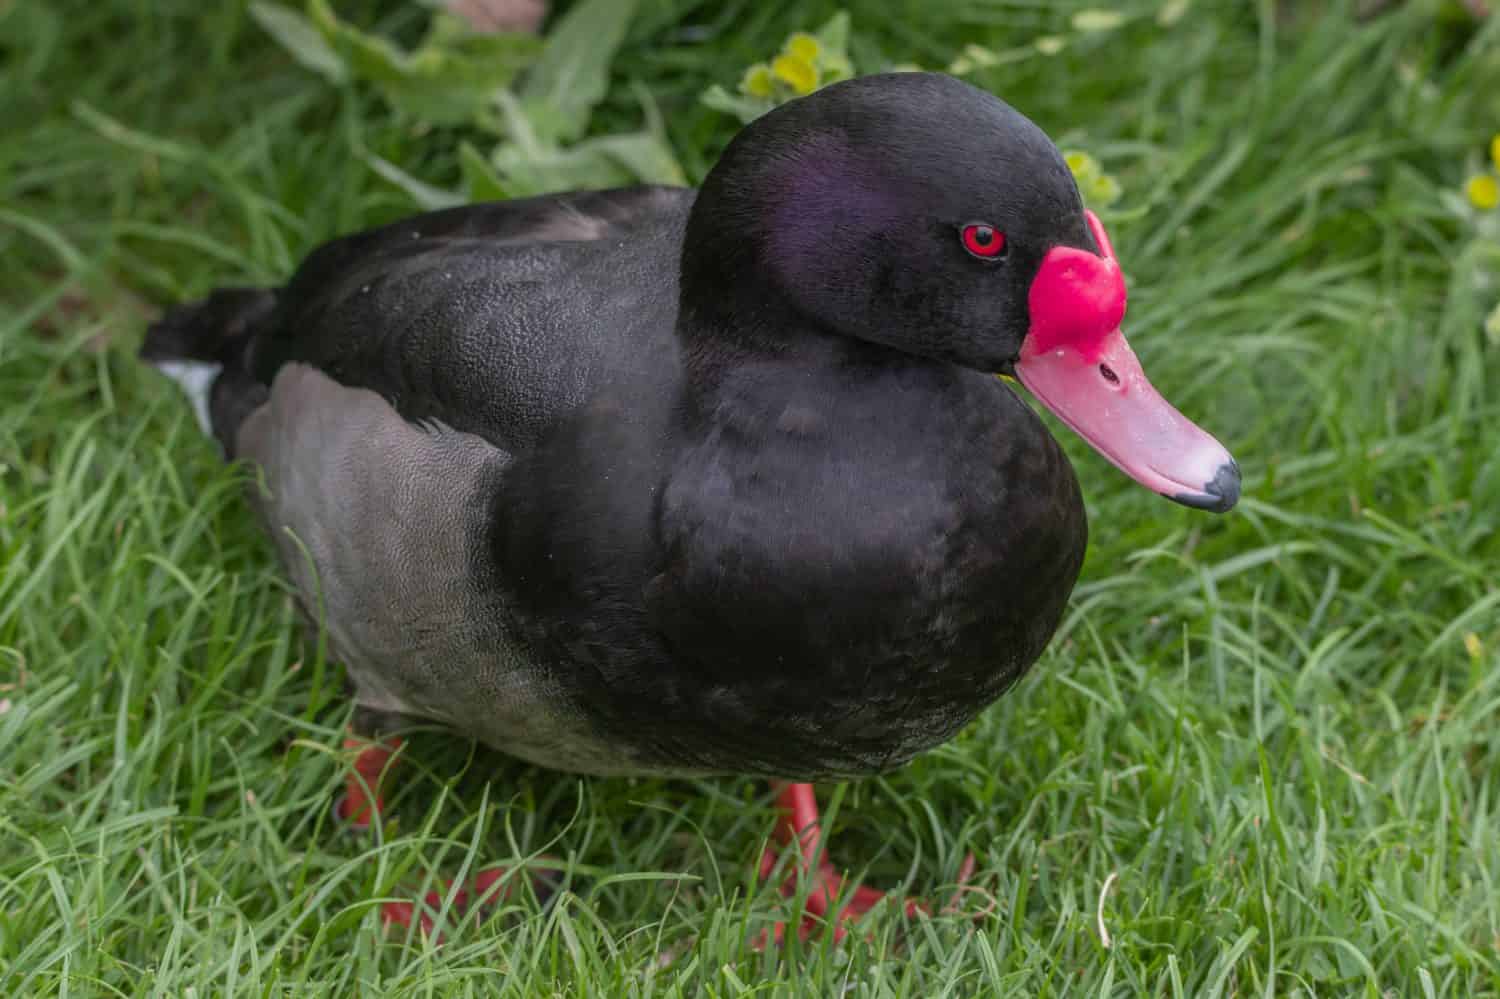 A close up of a Rosybill Pochard diving Duck with piercing red eyes